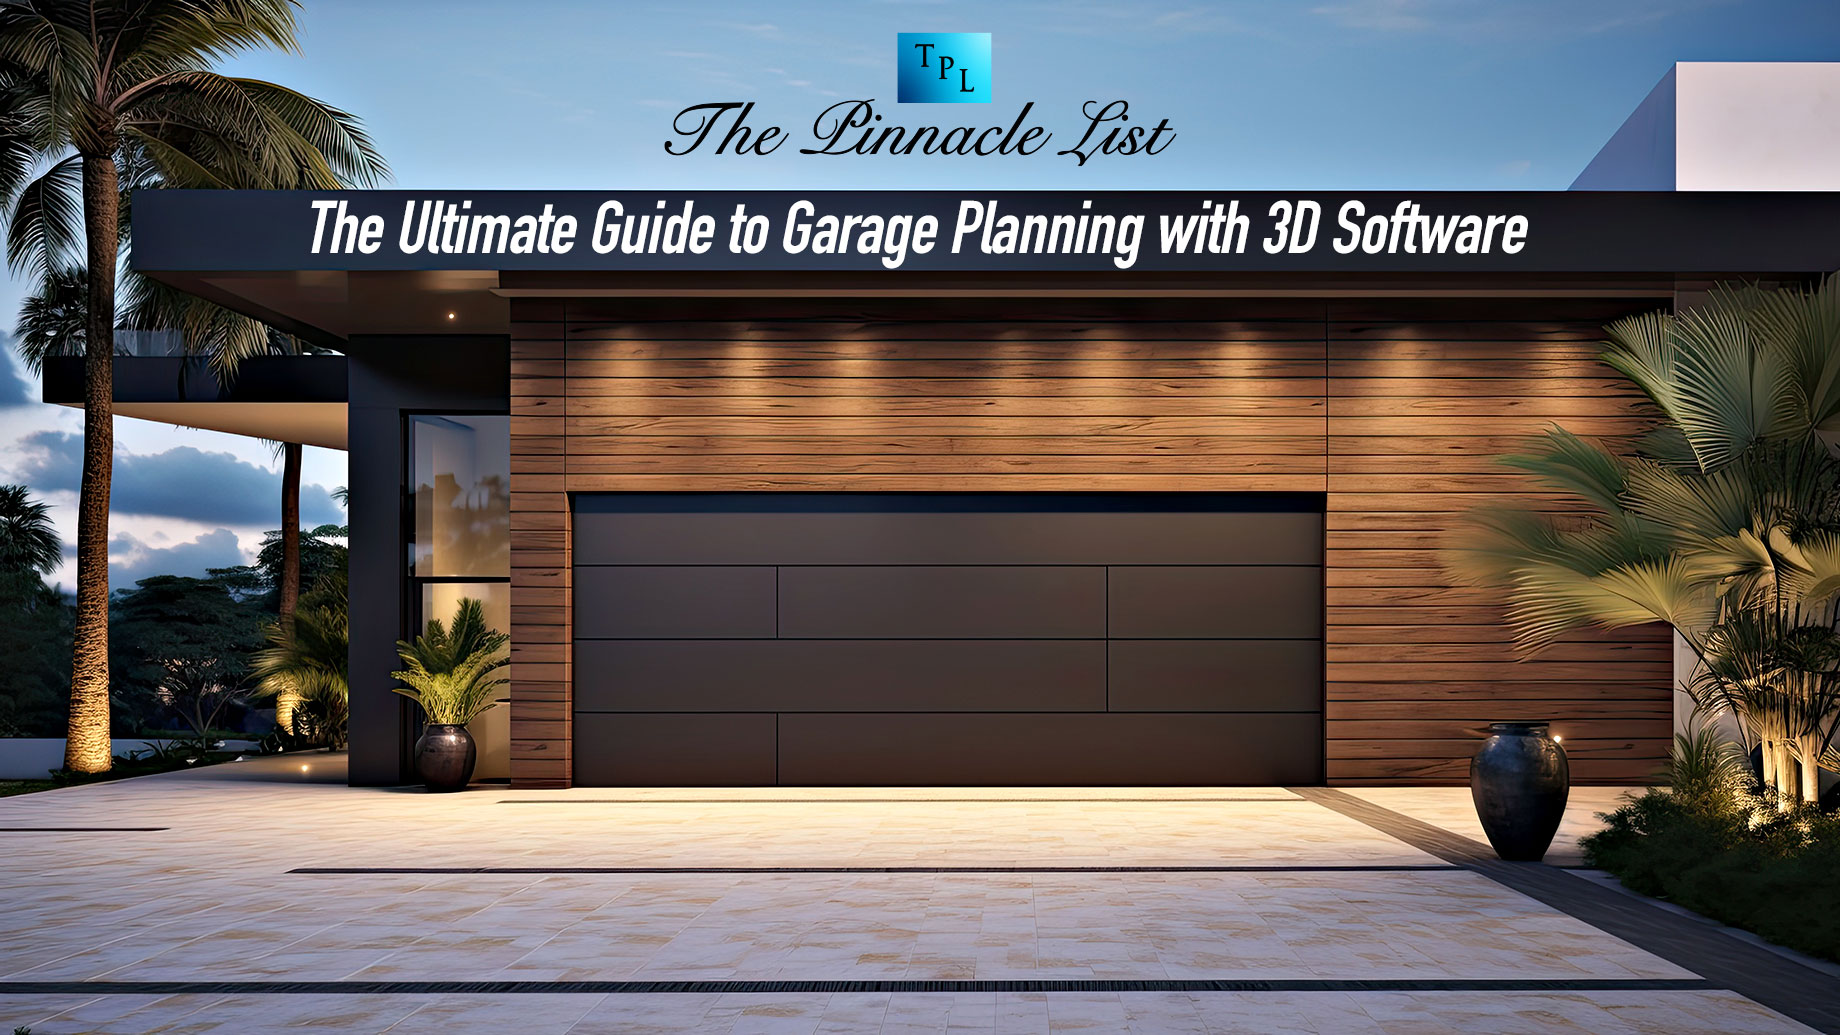 The Ultimate Guide to Garage Planning with 3D Software